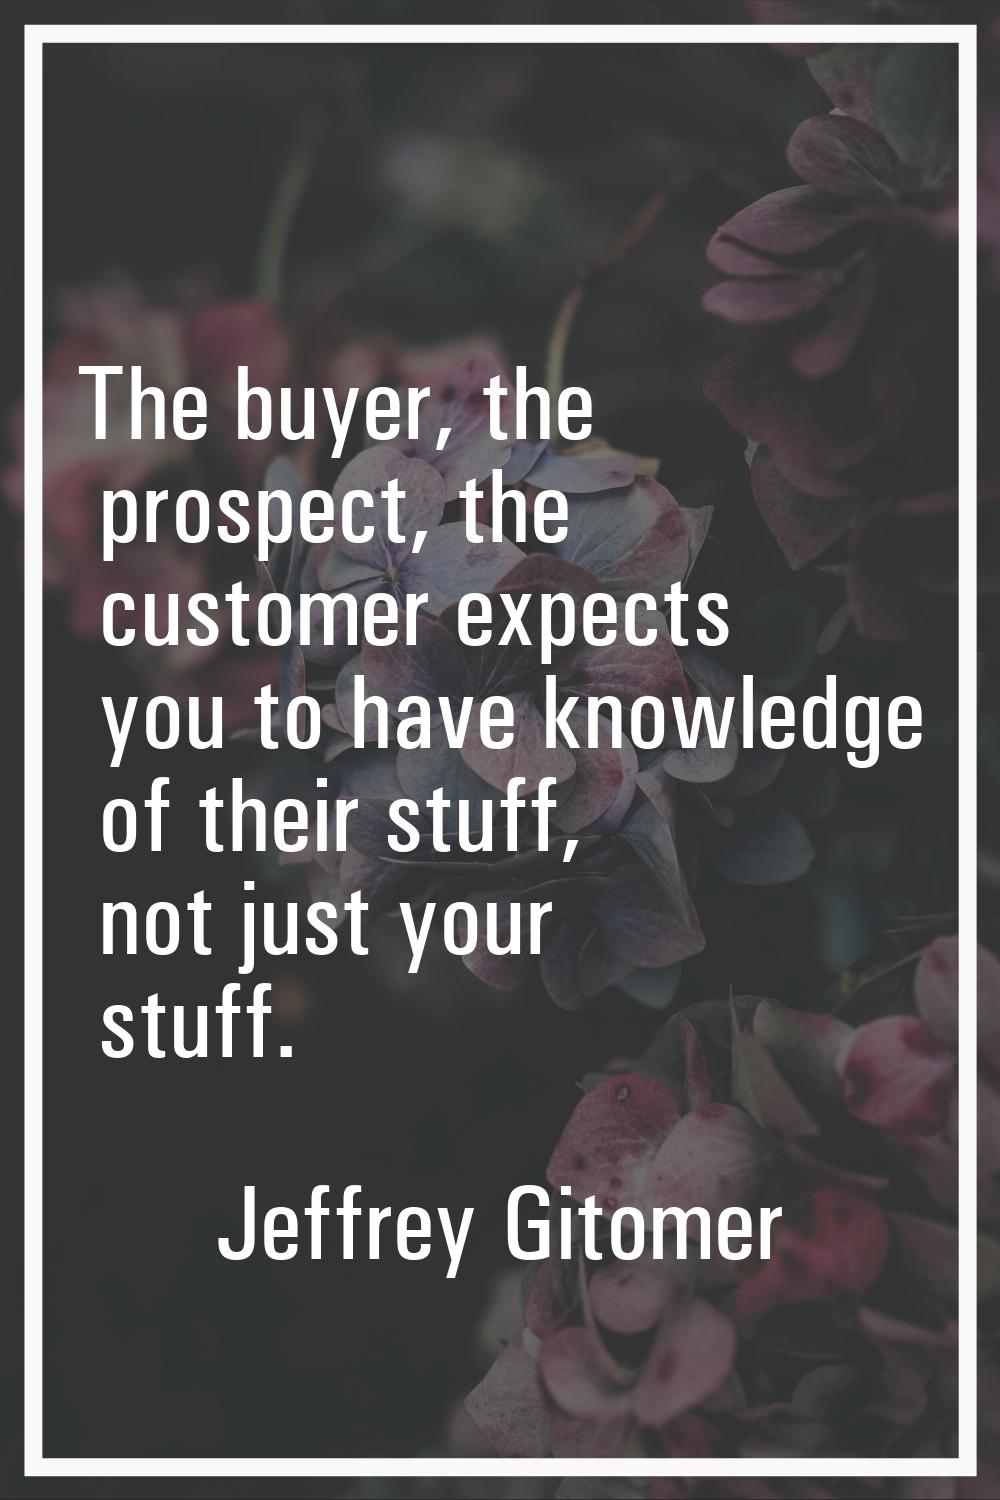 The buyer, the prospect, the customer expects you to have knowledge of their stuff, not just your s